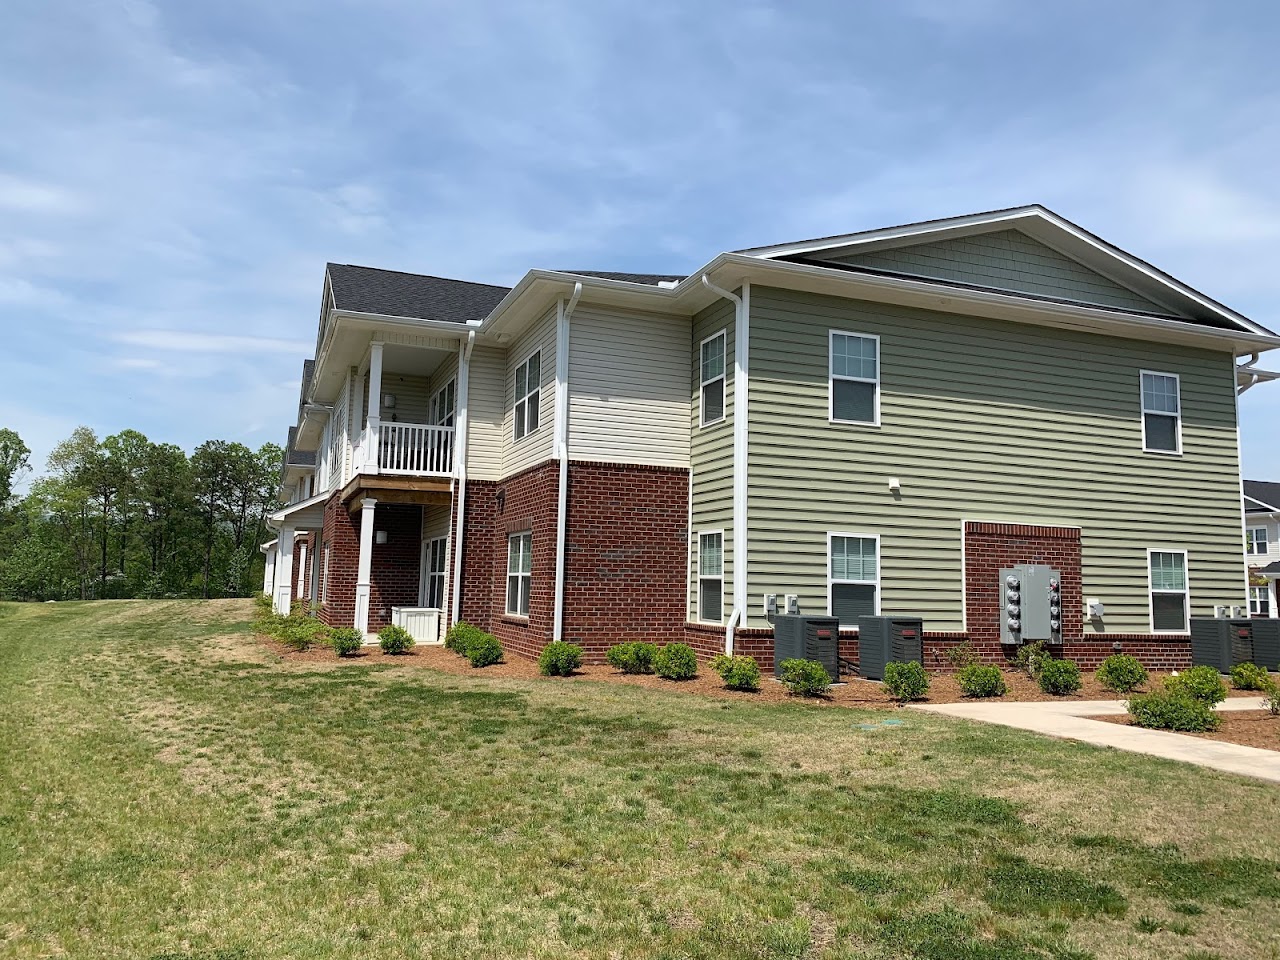 Photo of CEDAR TERRACE. Affordable housing located at 244 ETHAN WAY HENDERSONVILLE, NC 28792